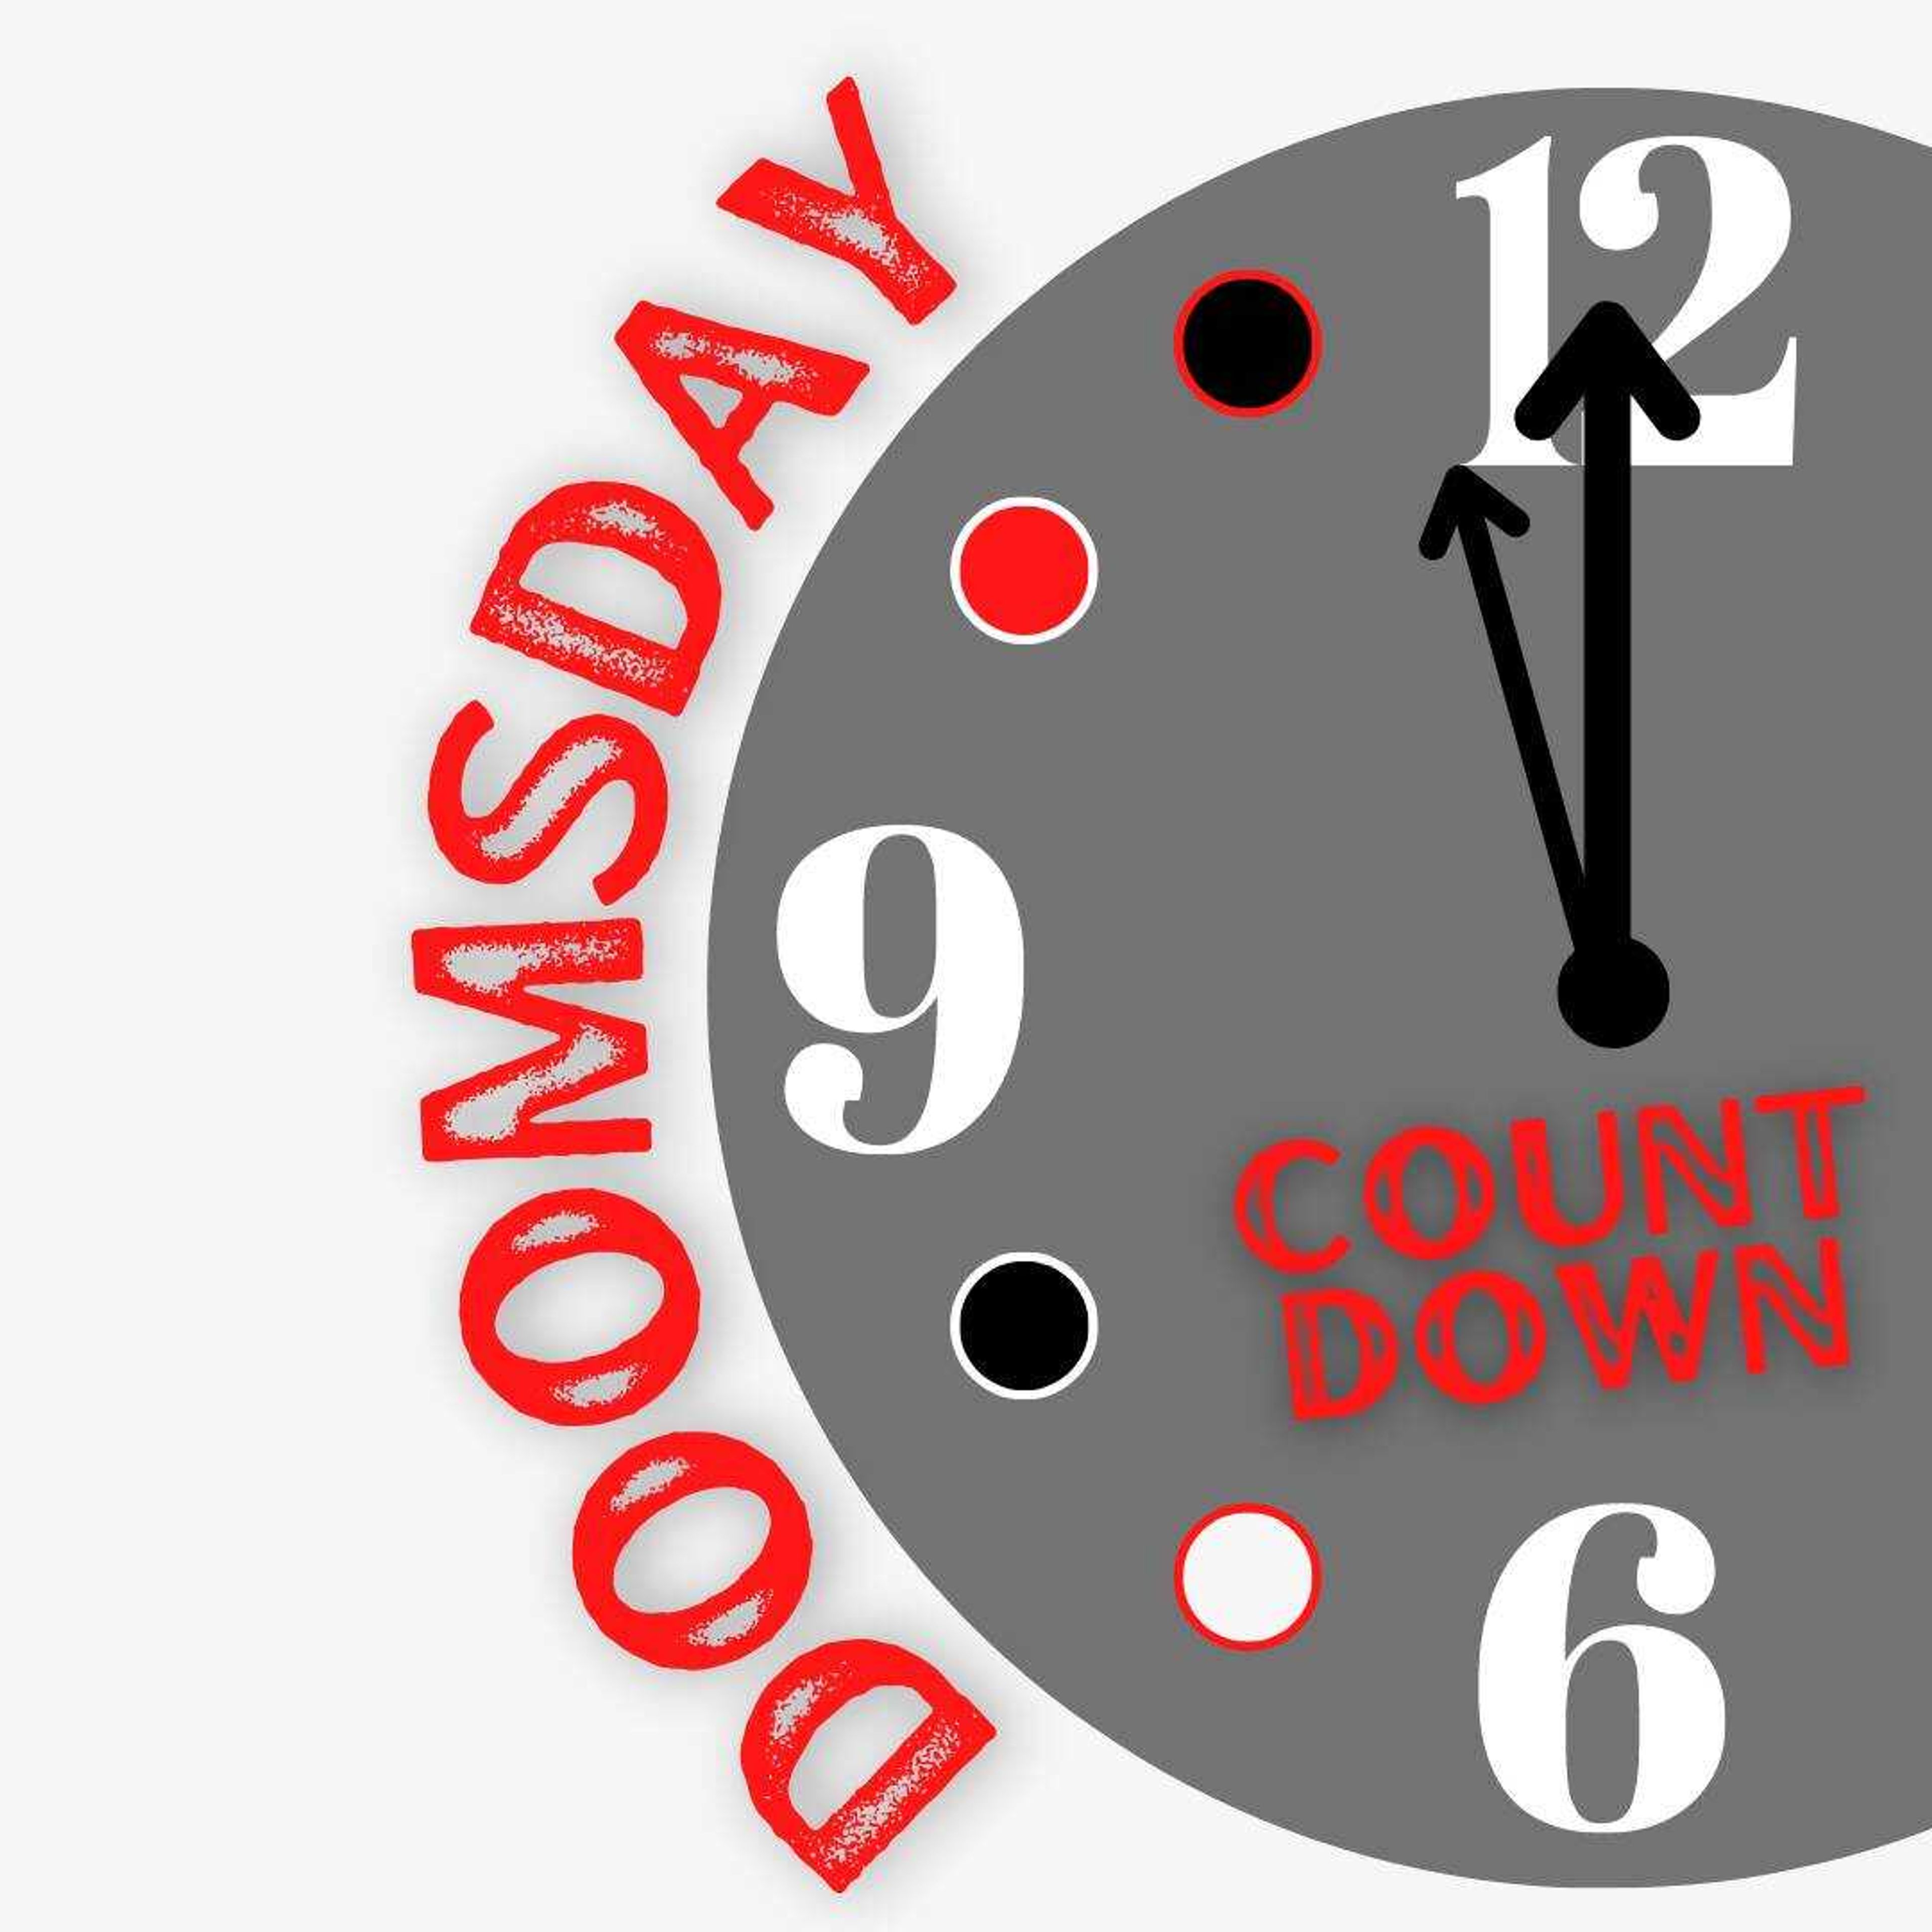 Countdown to armageddon as Doomsday Clock reaches “90 seconds to midnight”